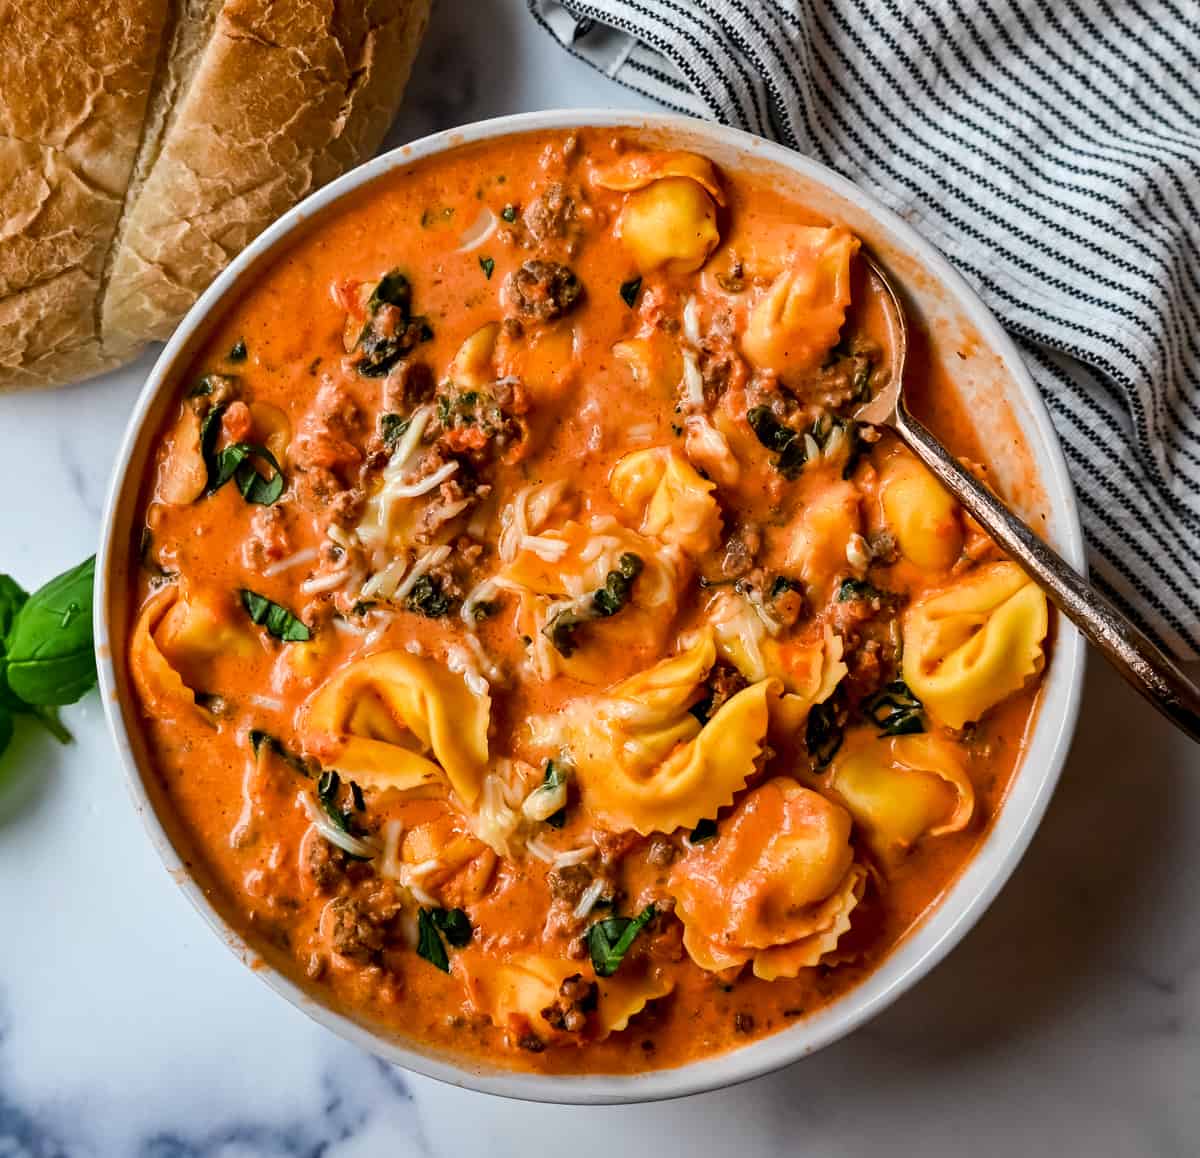 Creamy Sausage Tortellini Soup. An easy 6-ingredient Sausage Tortellini Soup is a family favorite. This popular soup recipe can be made on the stovetop or in a slow cooker. Rich, creamy, flavorful soup that everyone raves about! 